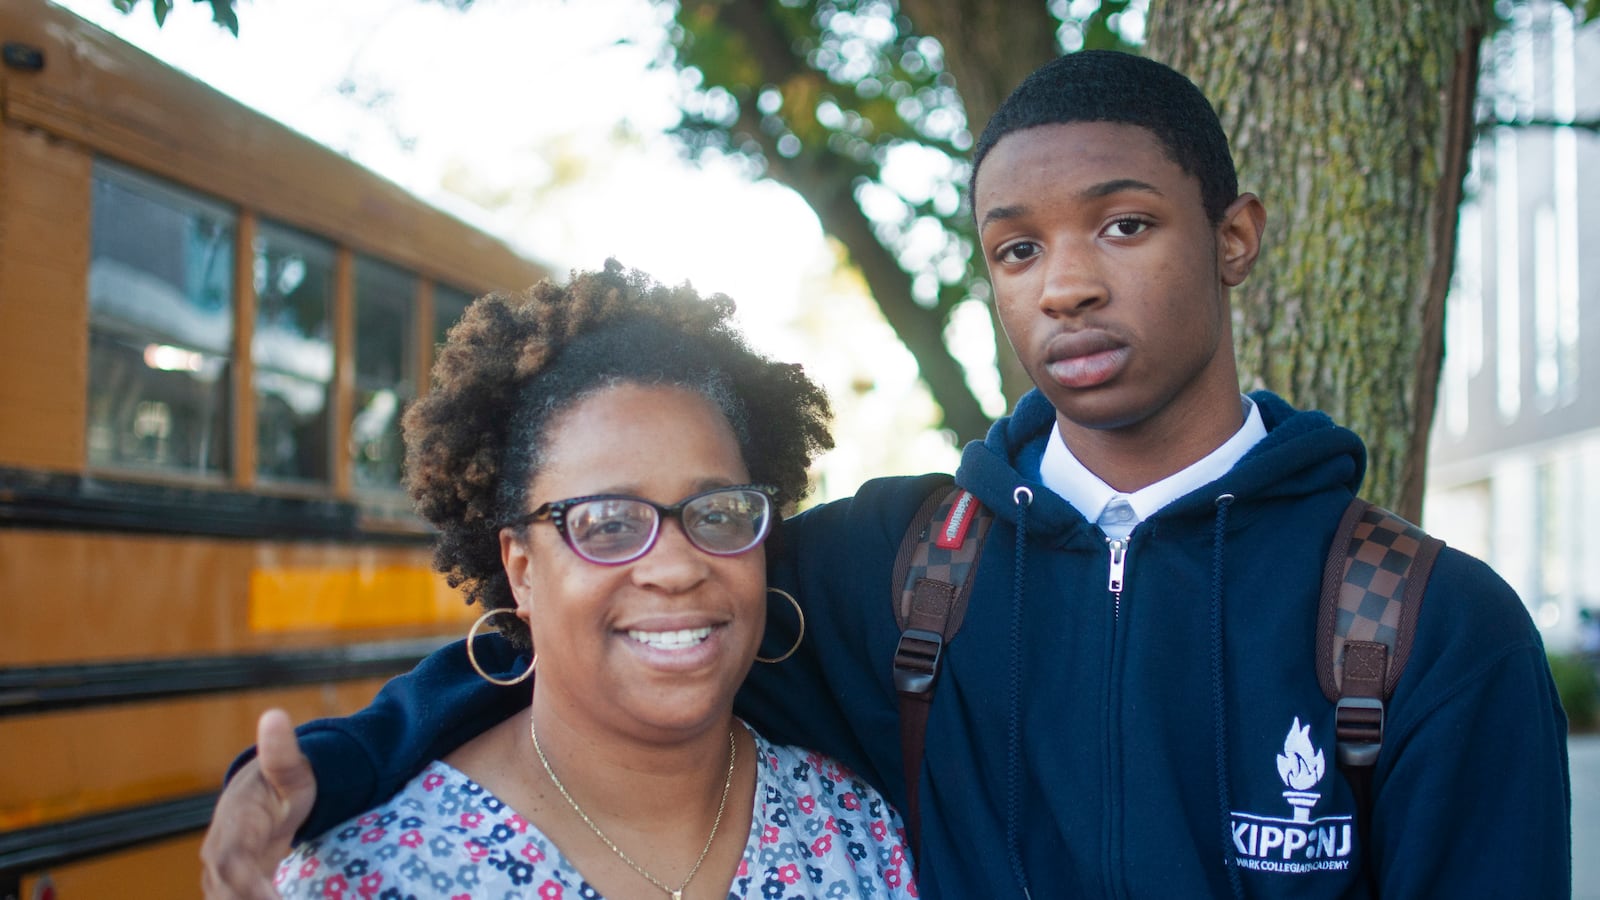 Van Ness Roper's wife, Patricia Noon-Roper, stands with her son, Jahad Noon-Glanton, in front of the KIPP charter school he now attends. Jahad's parents moved him to a charter school after his district school didn't provide him with the services that he requires to accommodate his learning disability.